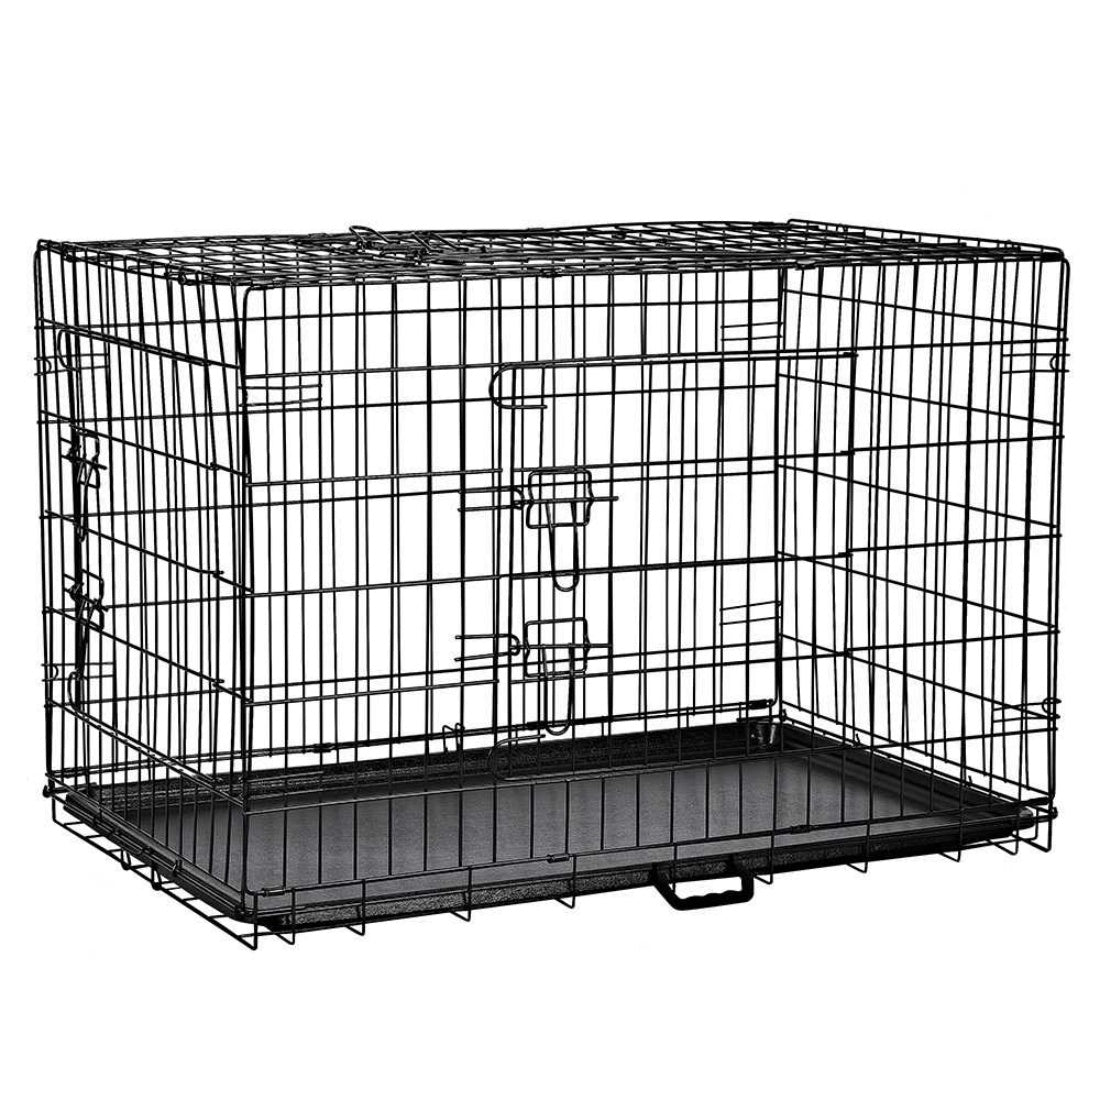 New Pet Dog Folding Kennel Cage Crate Carrier 48” XX Large